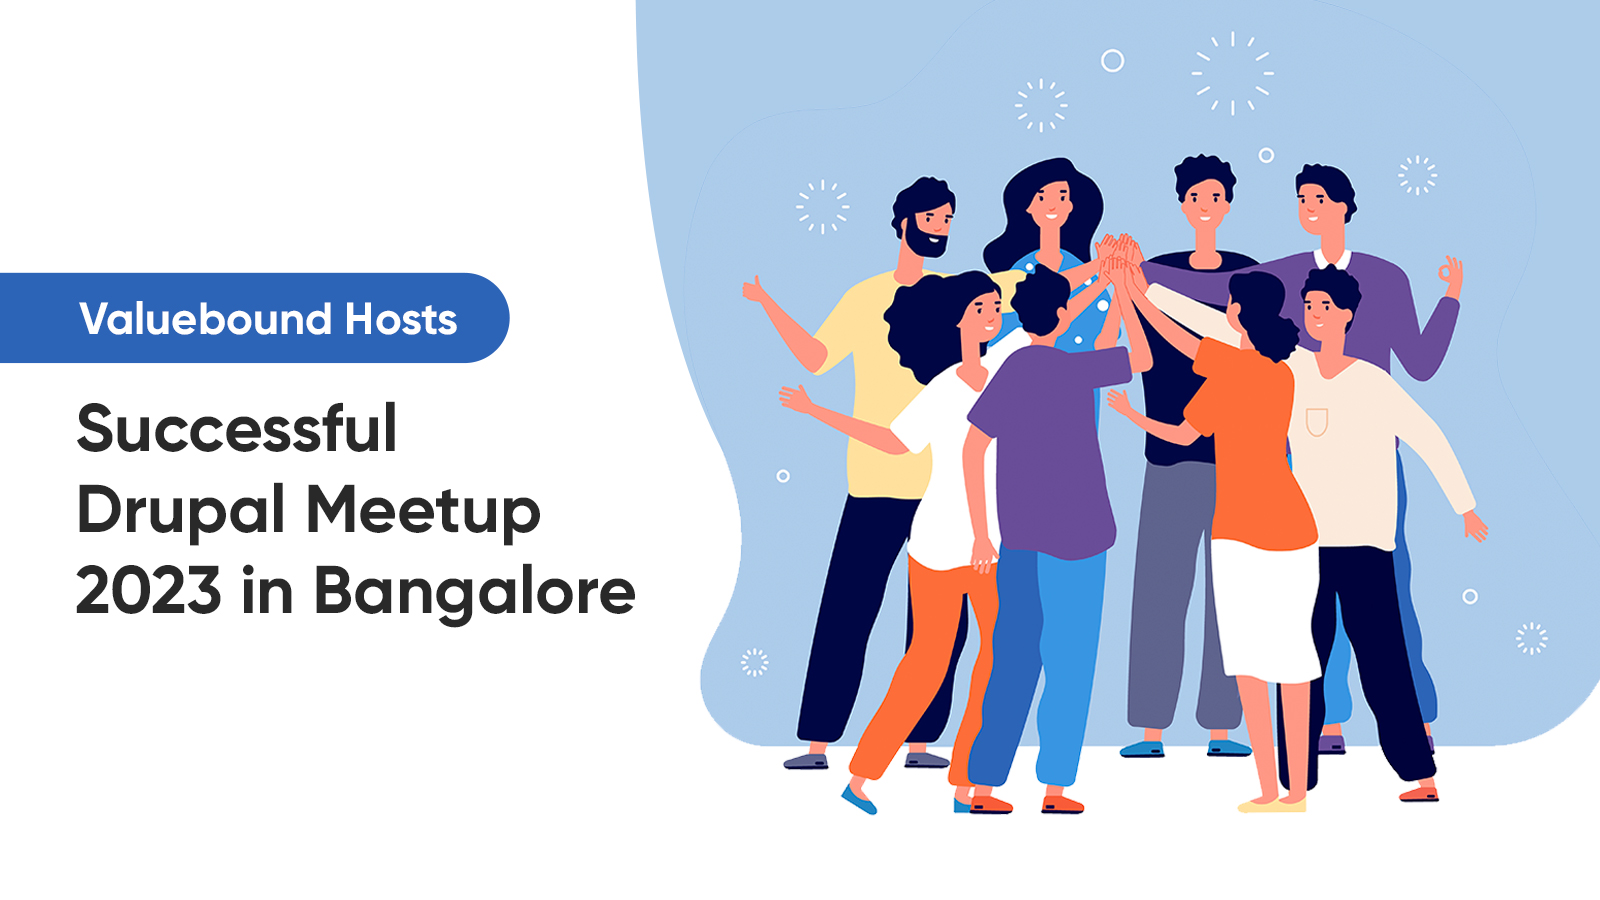 Valuebound Hosts Successful Drupal Meetup 2023 in Bangalore